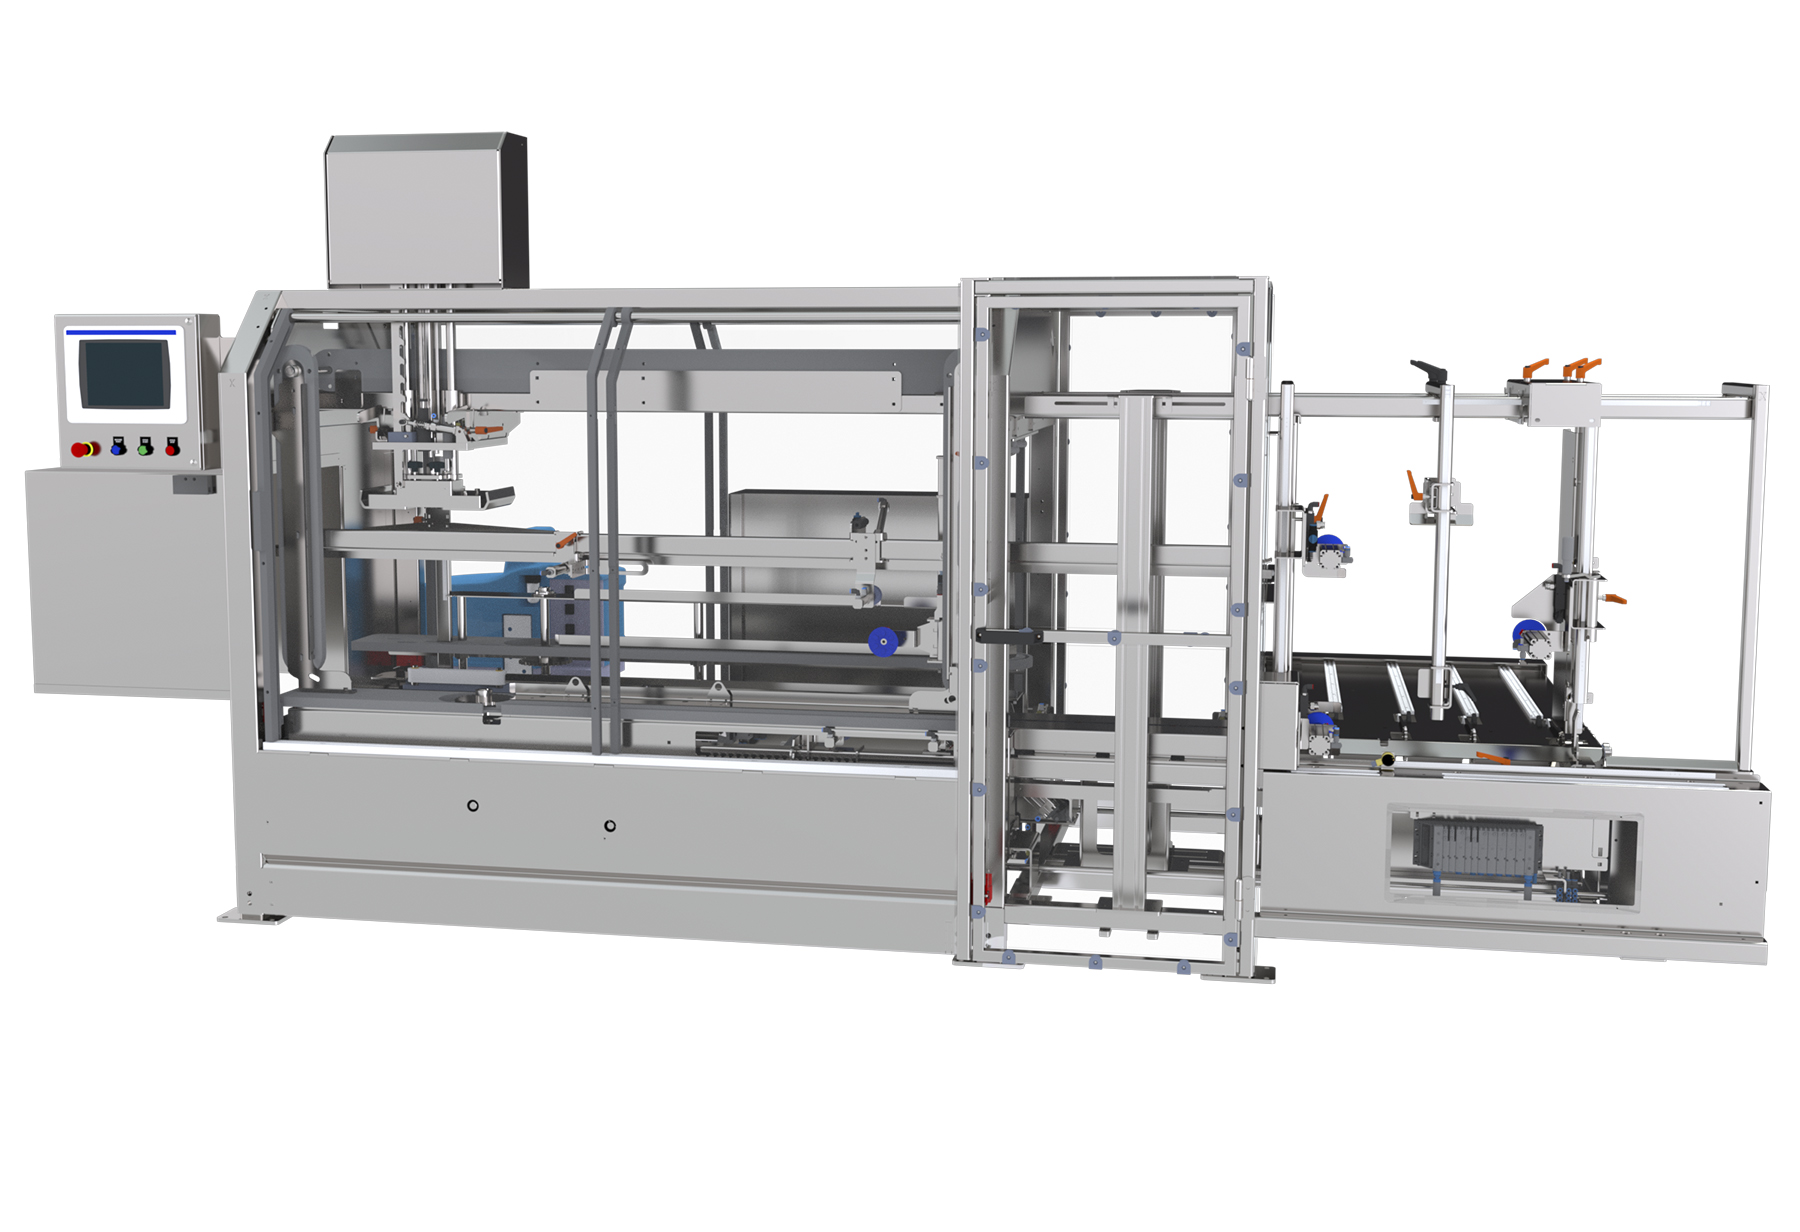 Pearson Packaging Systems' new CS25-P case erector with in-line printer mount